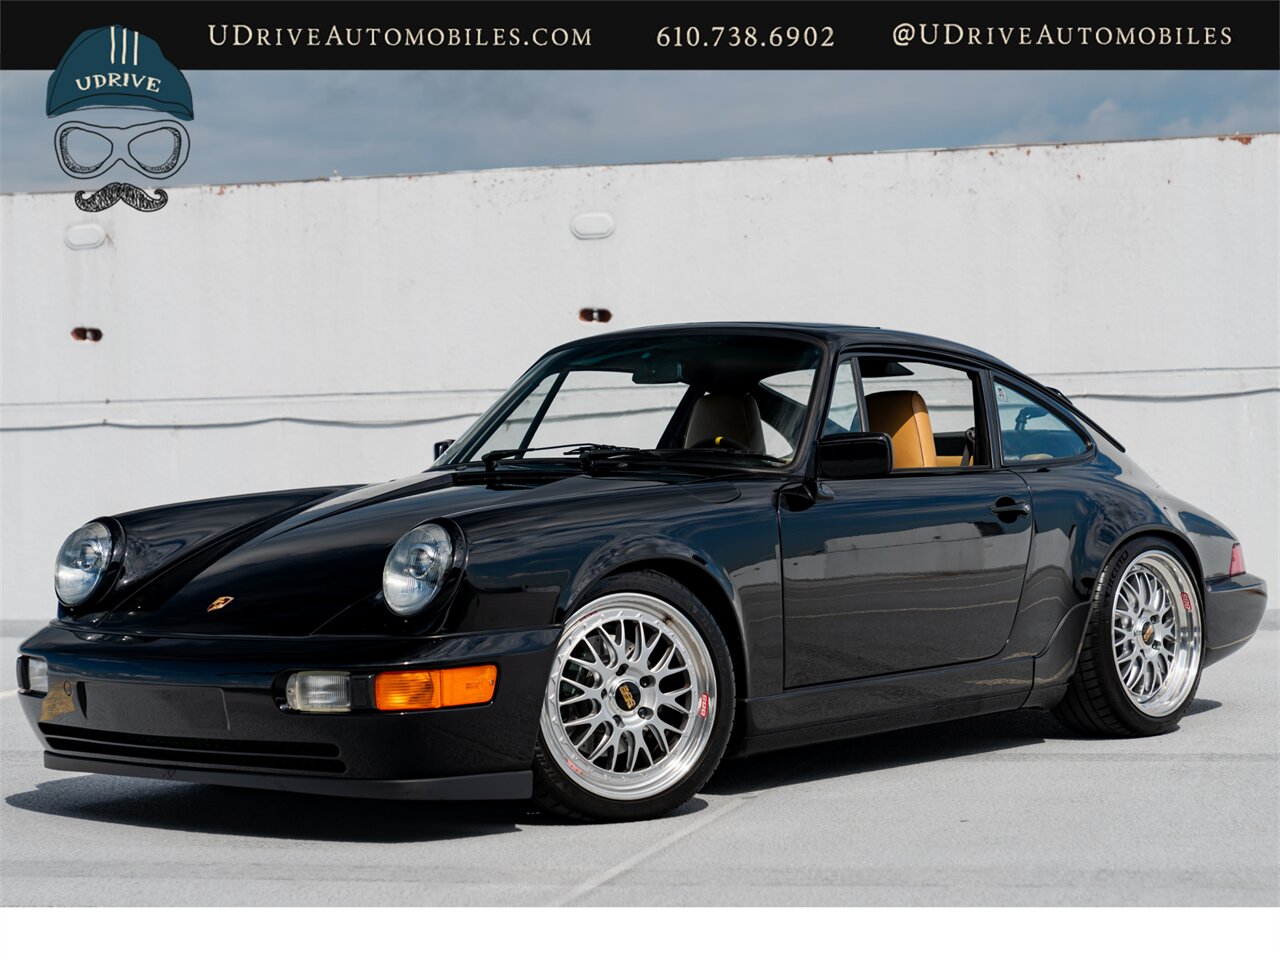 1989 Porsche 911 Carrera 4  964 C4 5 Speed Manual $63k Recent Service and Upgrades - Photo 1 - West Chester, PA 19382